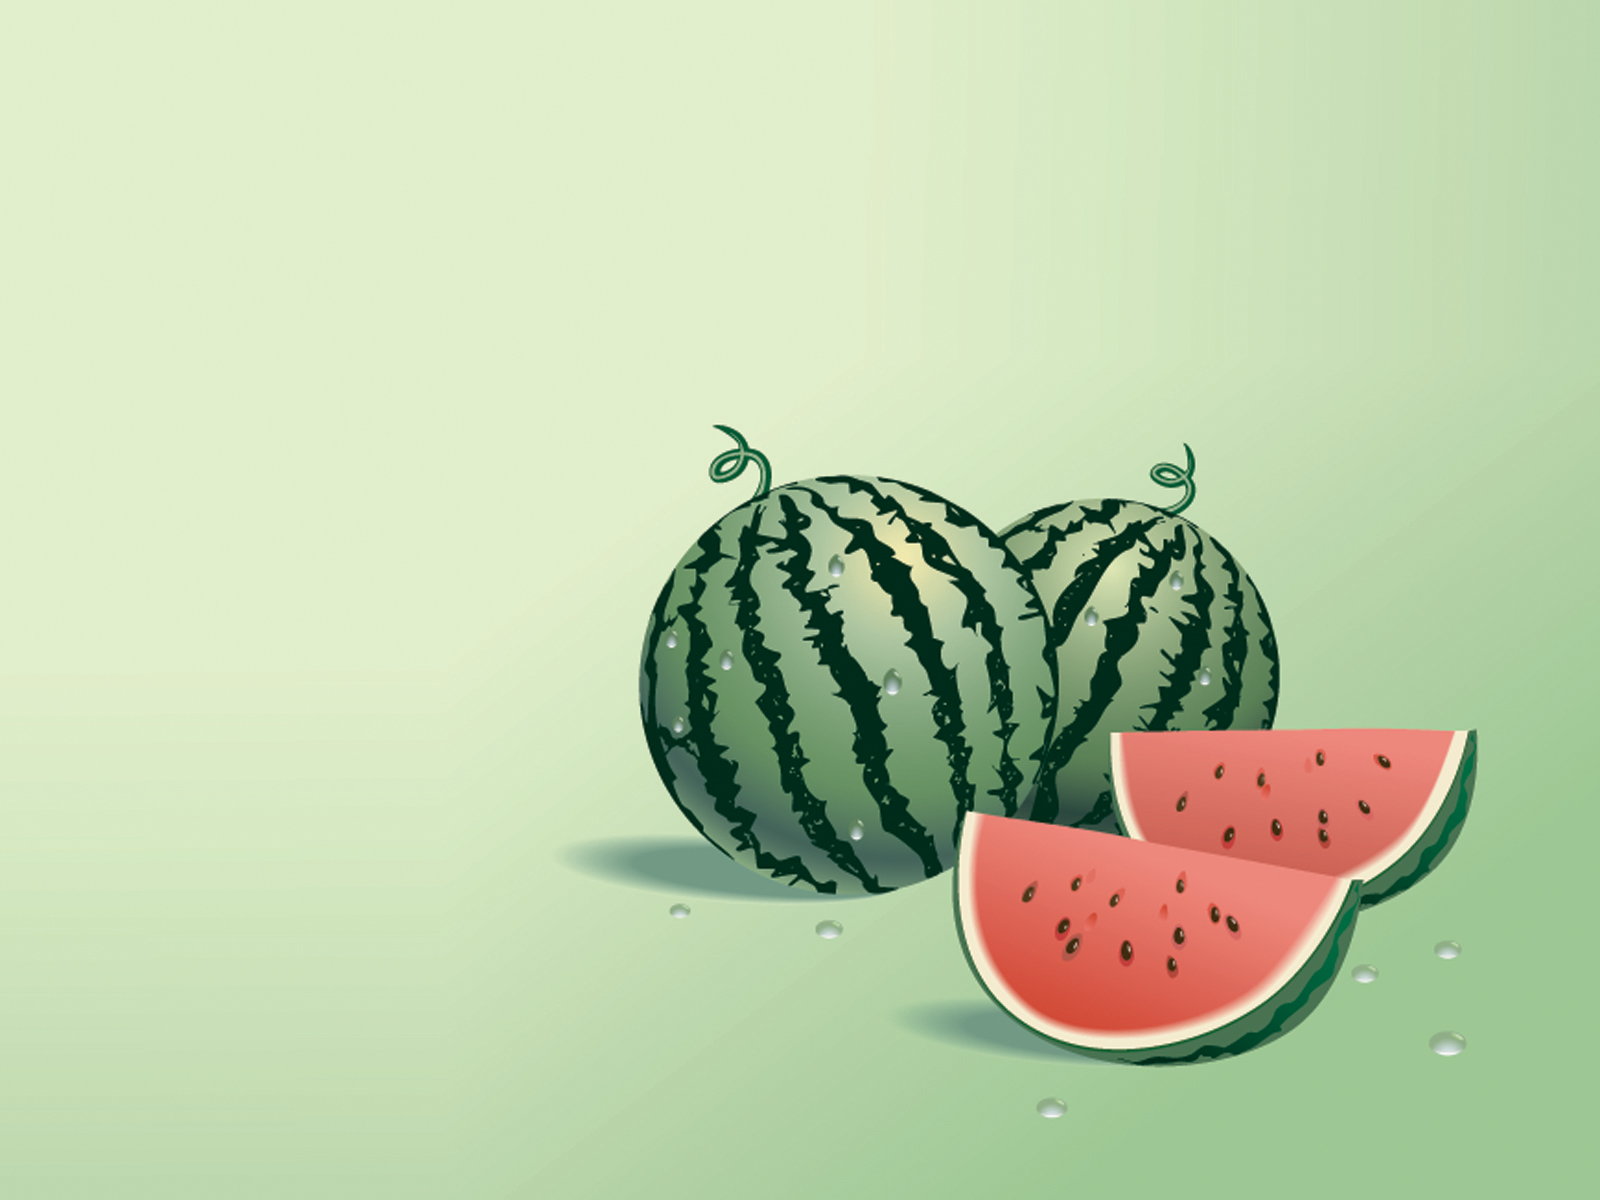 Watermelon Vector PPT Backgrounds